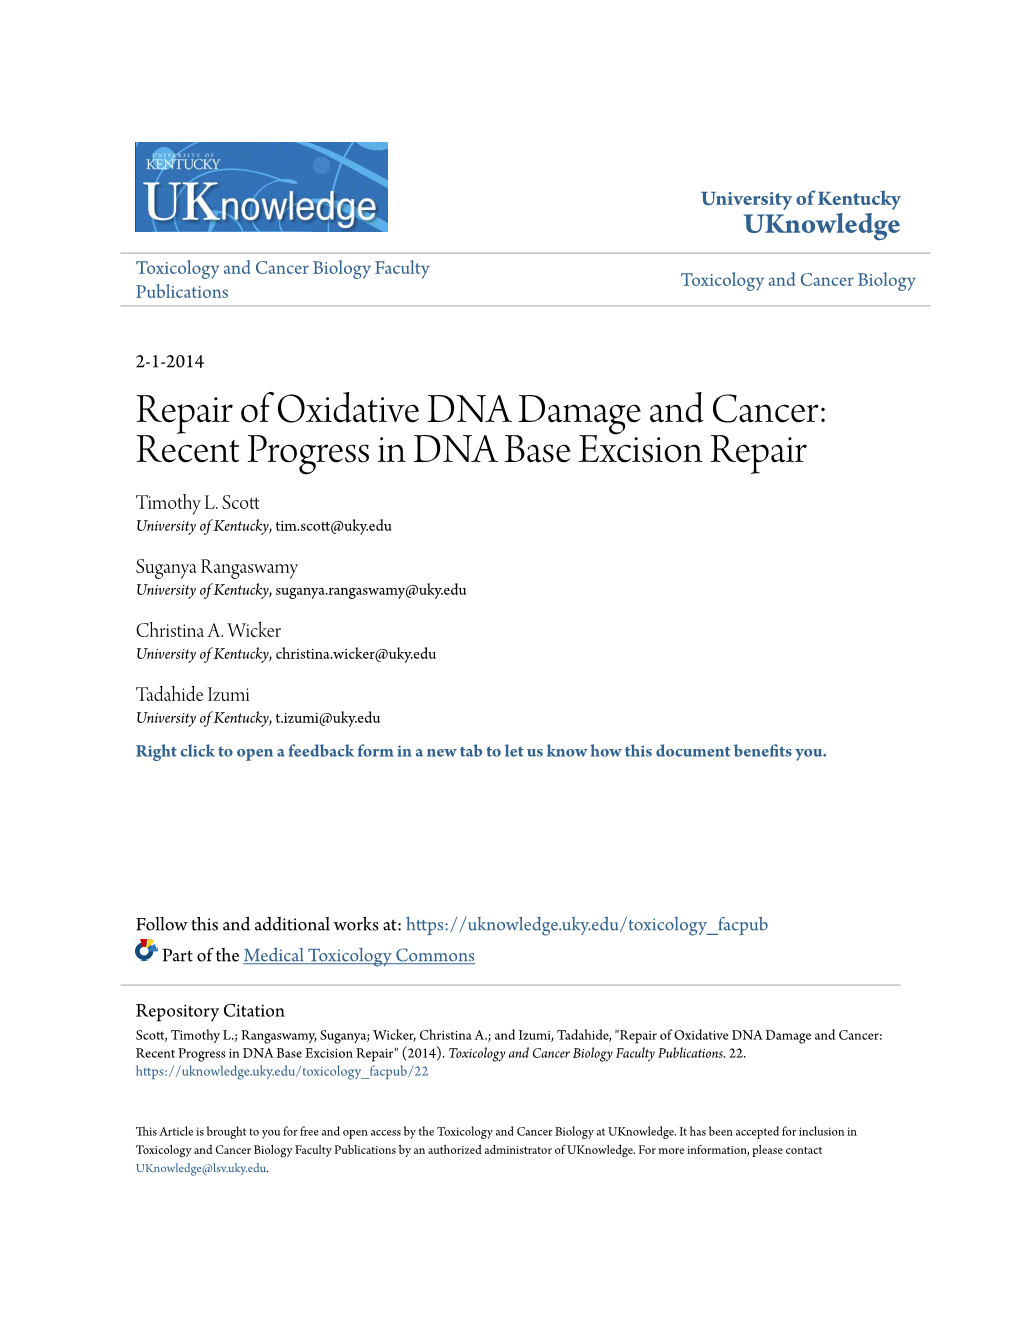 Repair of Oxidative DNA Damage and Cancer: Recent Progress in DNA Base Excision Repair Timothy L